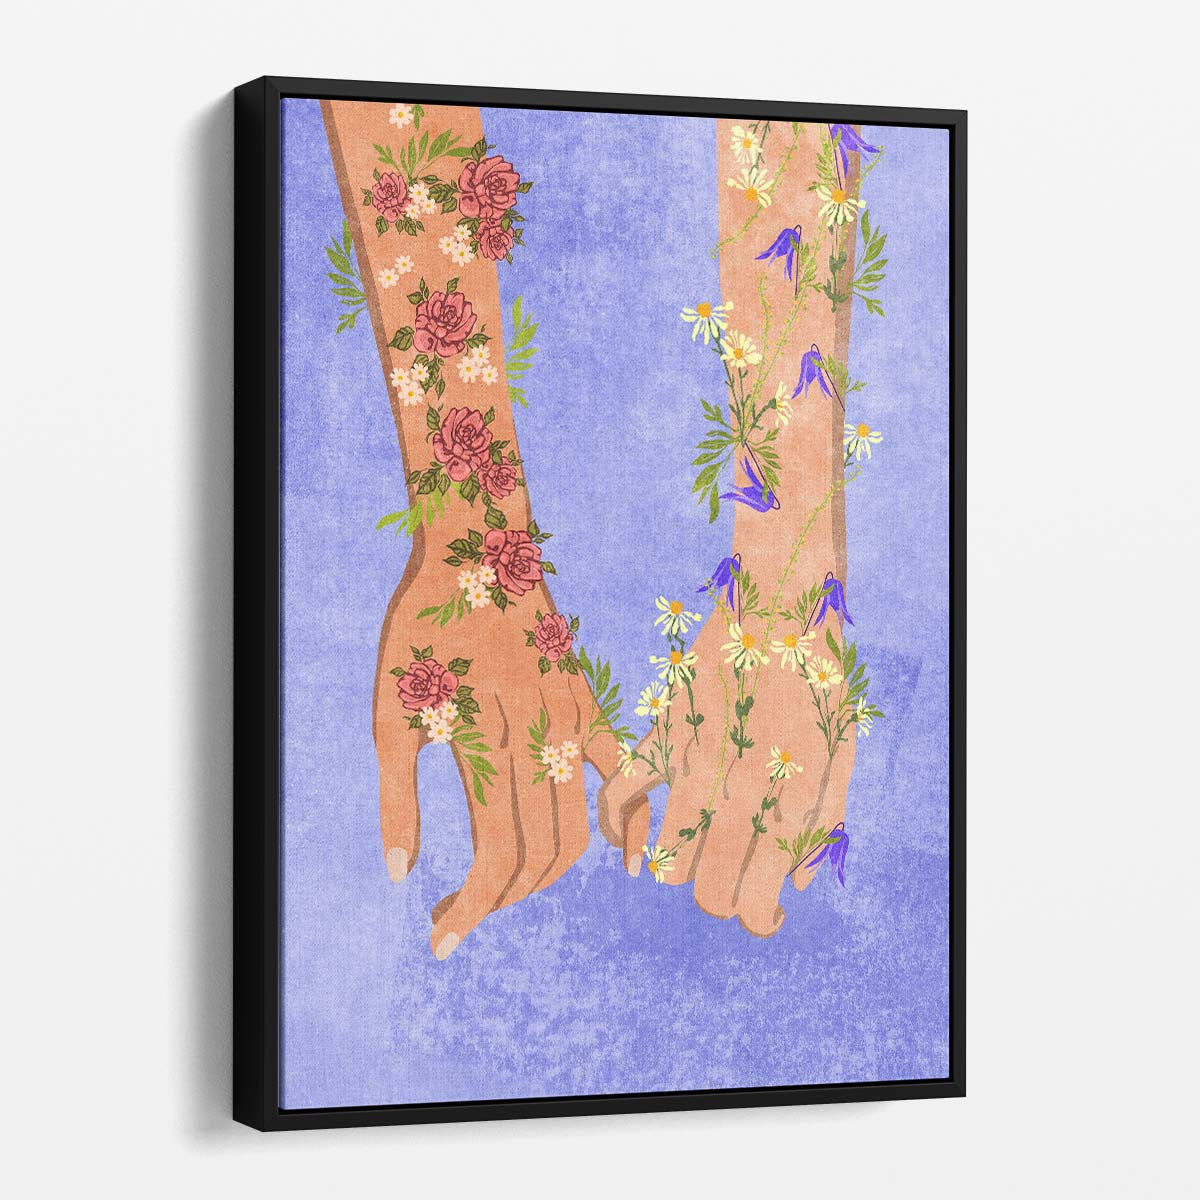 Floral Feminist Illustration Holding Hands by Raissa Oltmanns by Luxuriance Designs, made in USA